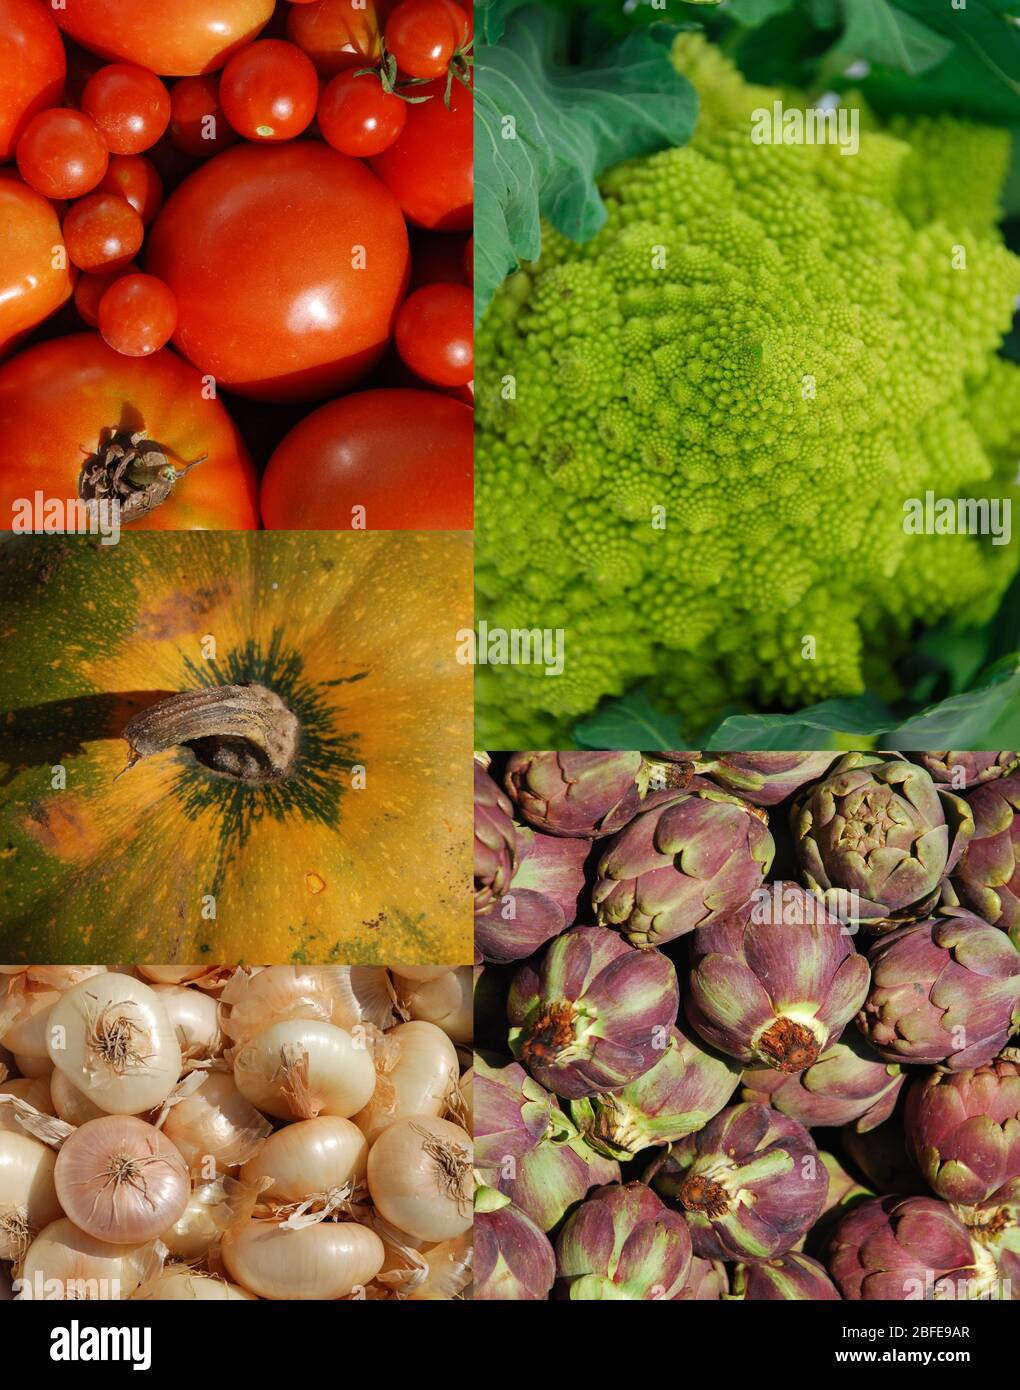 A collage of 5 colourful vegetable types: romanesco cauliflower, artichokes, pumpkin, button onions & a variety of tomatoes (including cherry & plum) Stock Photo